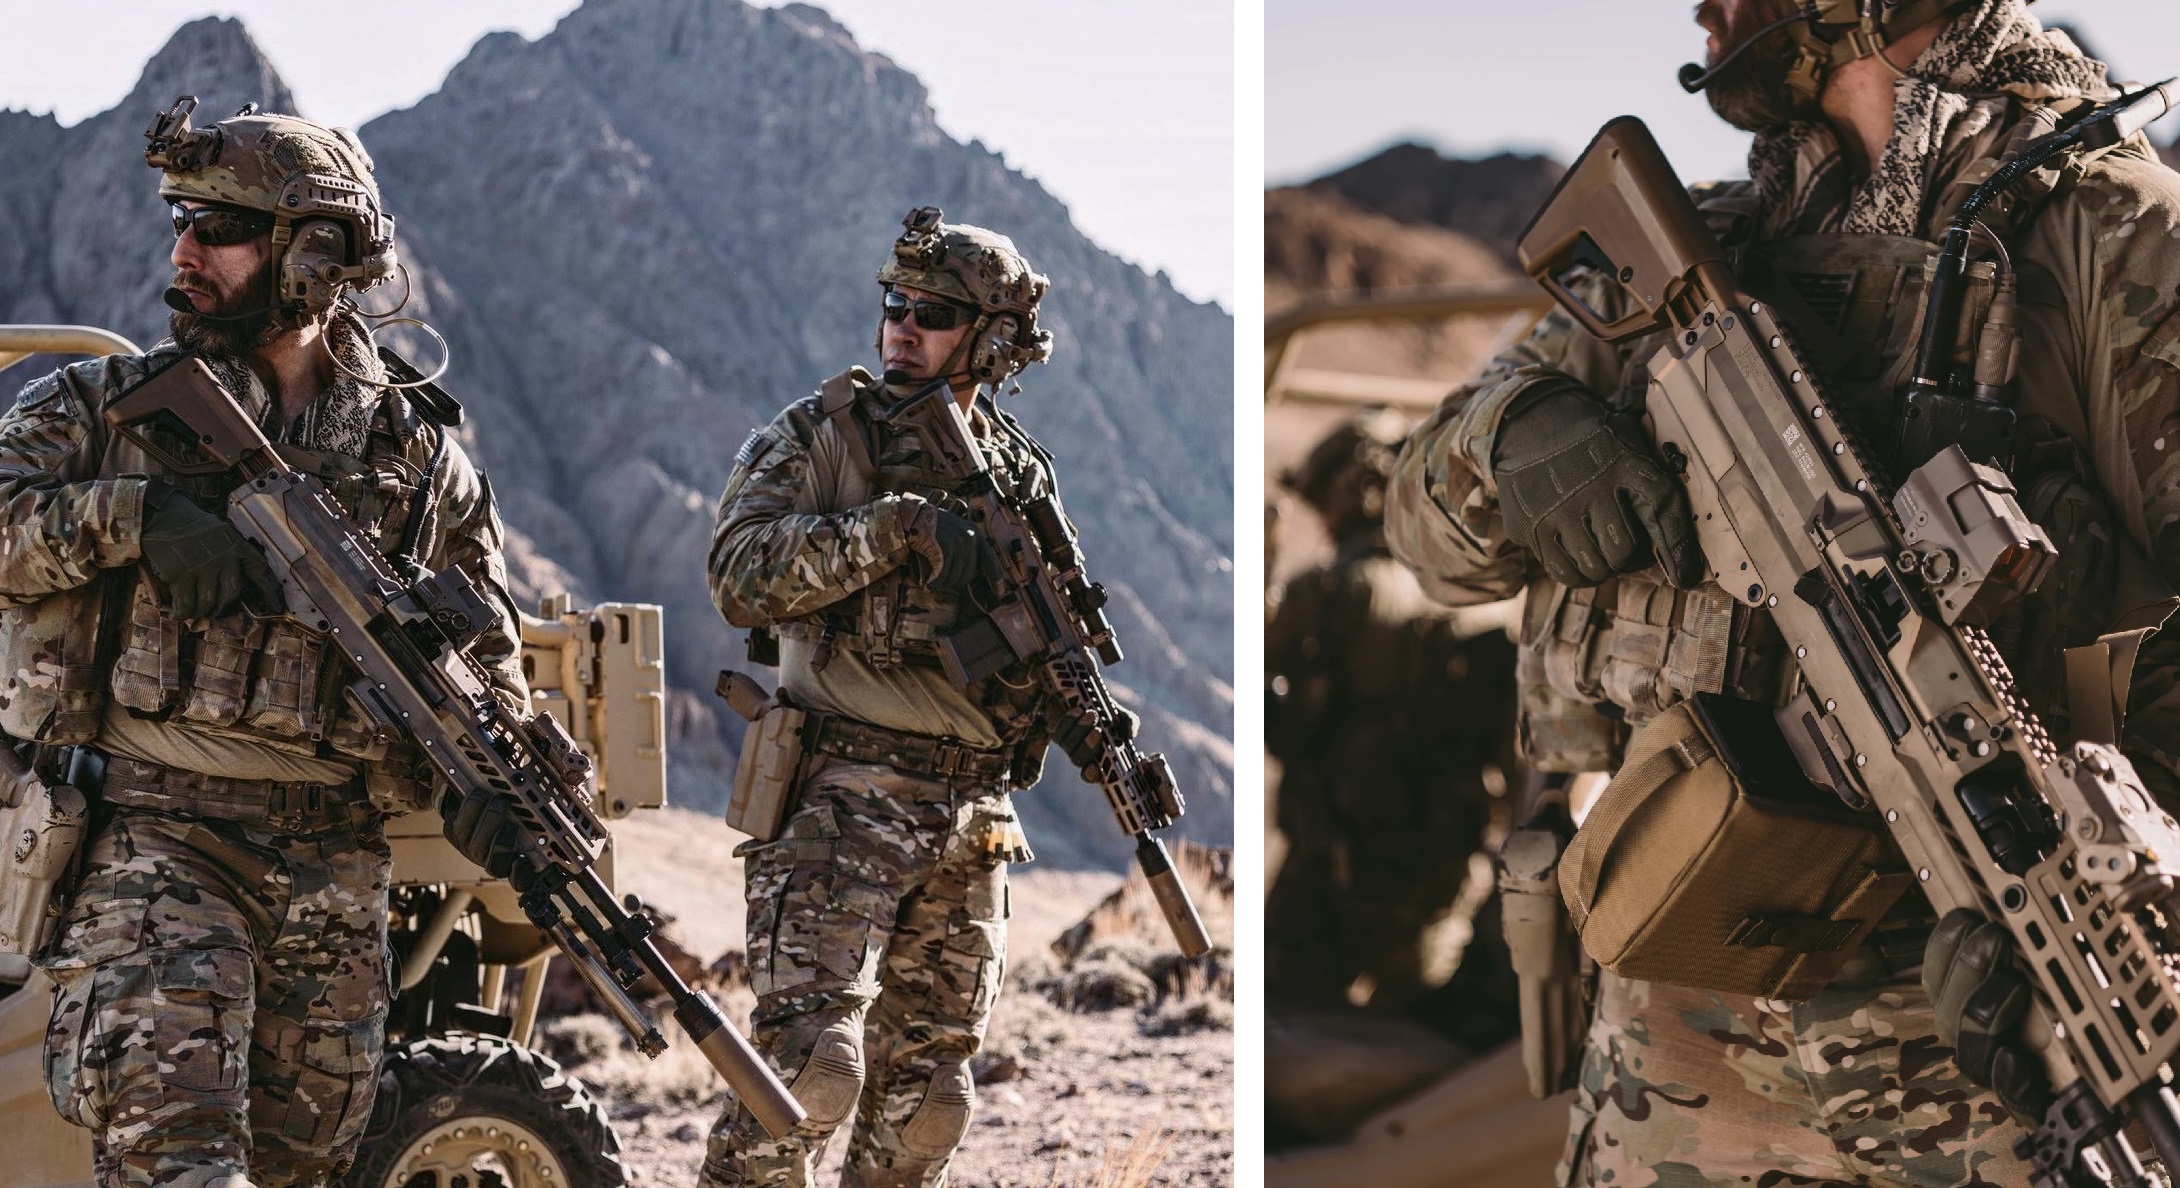 How Well Do the Army's New XM5 and XM250 Guns Perform?